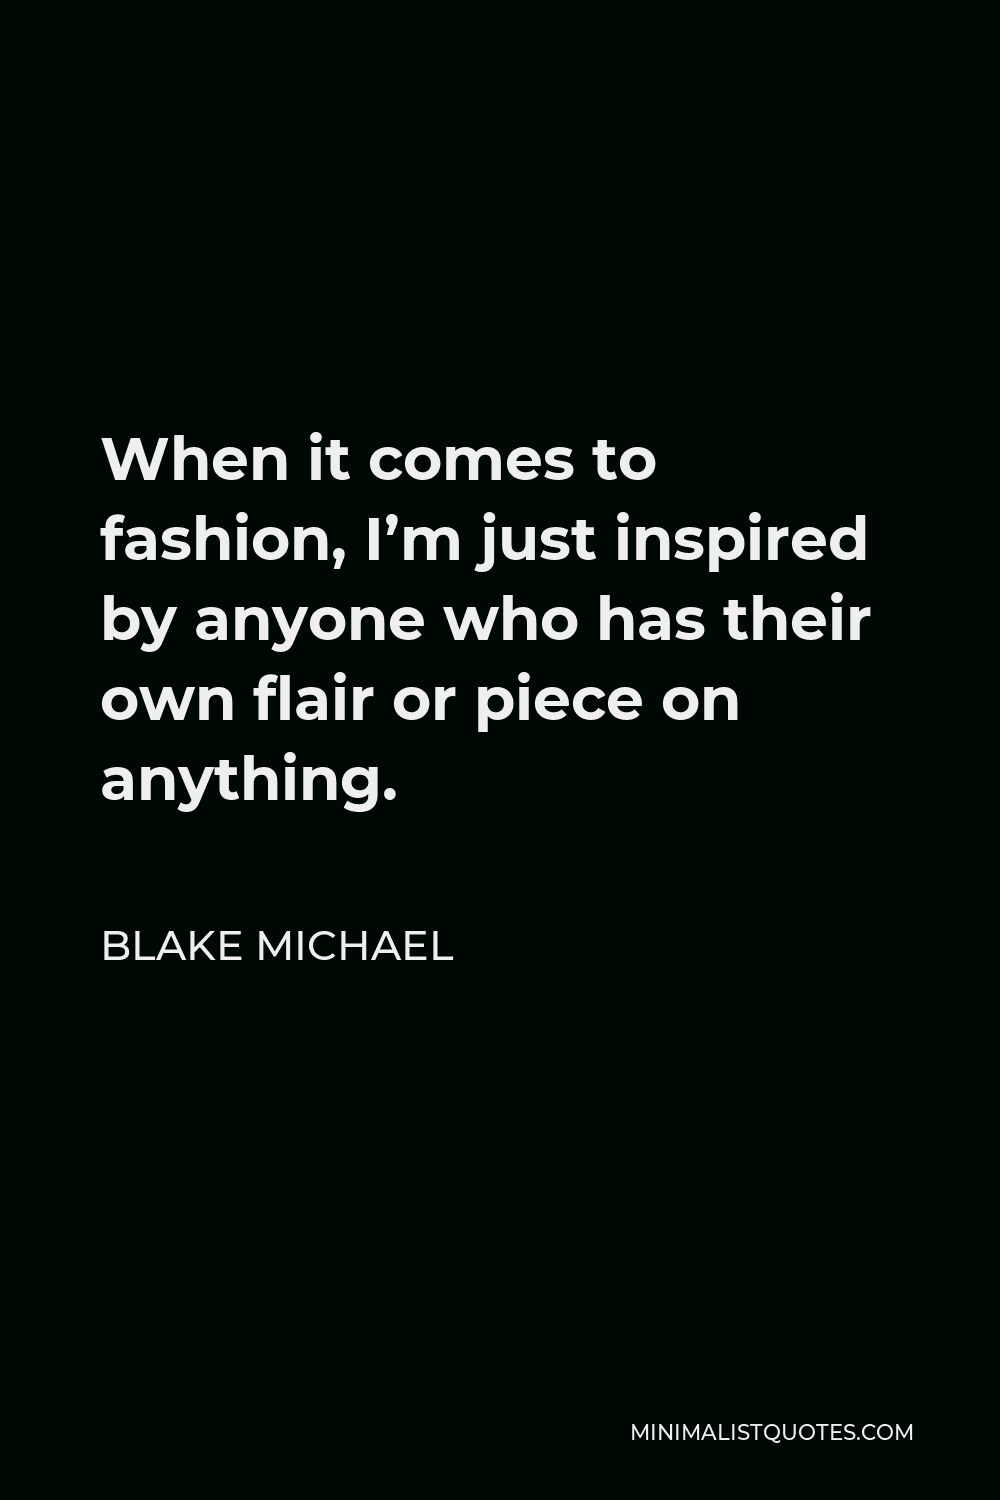 Blake Michael Quote When It Comes To Fashion I M Just Inspired By Anyone Who Has Their Own